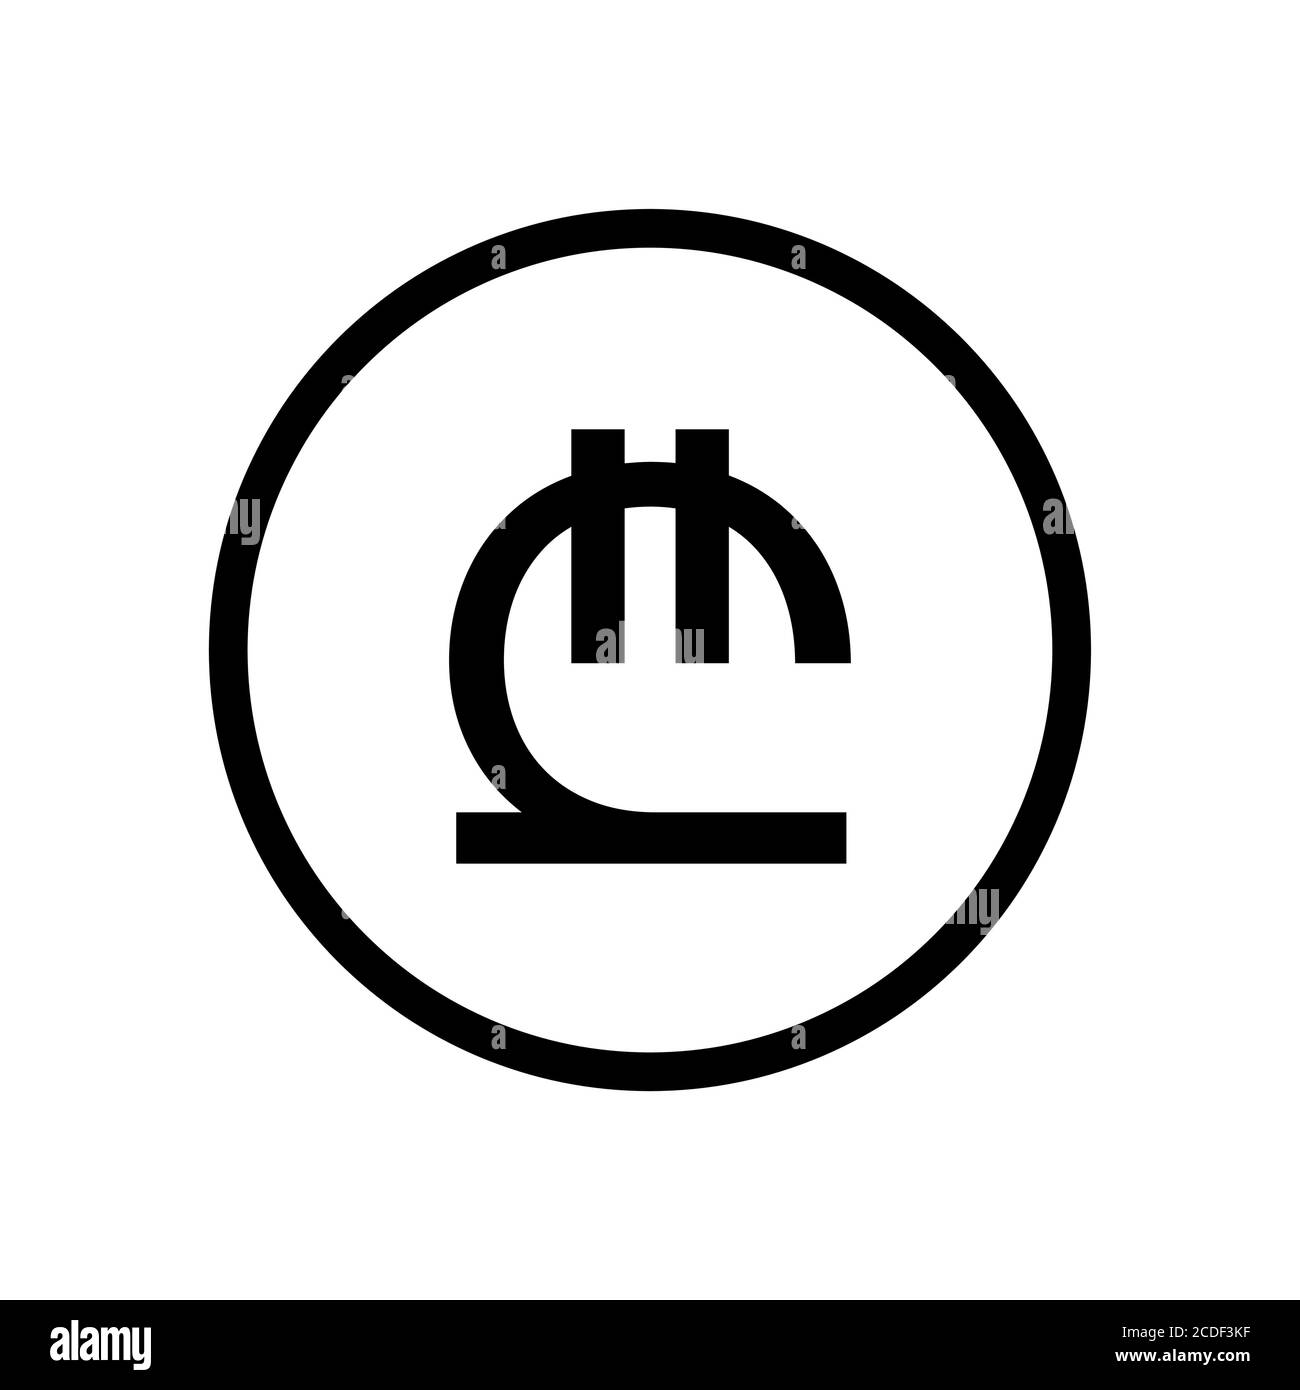 Lari coin monochrome black and white. Current currency symbol. Stock Vector